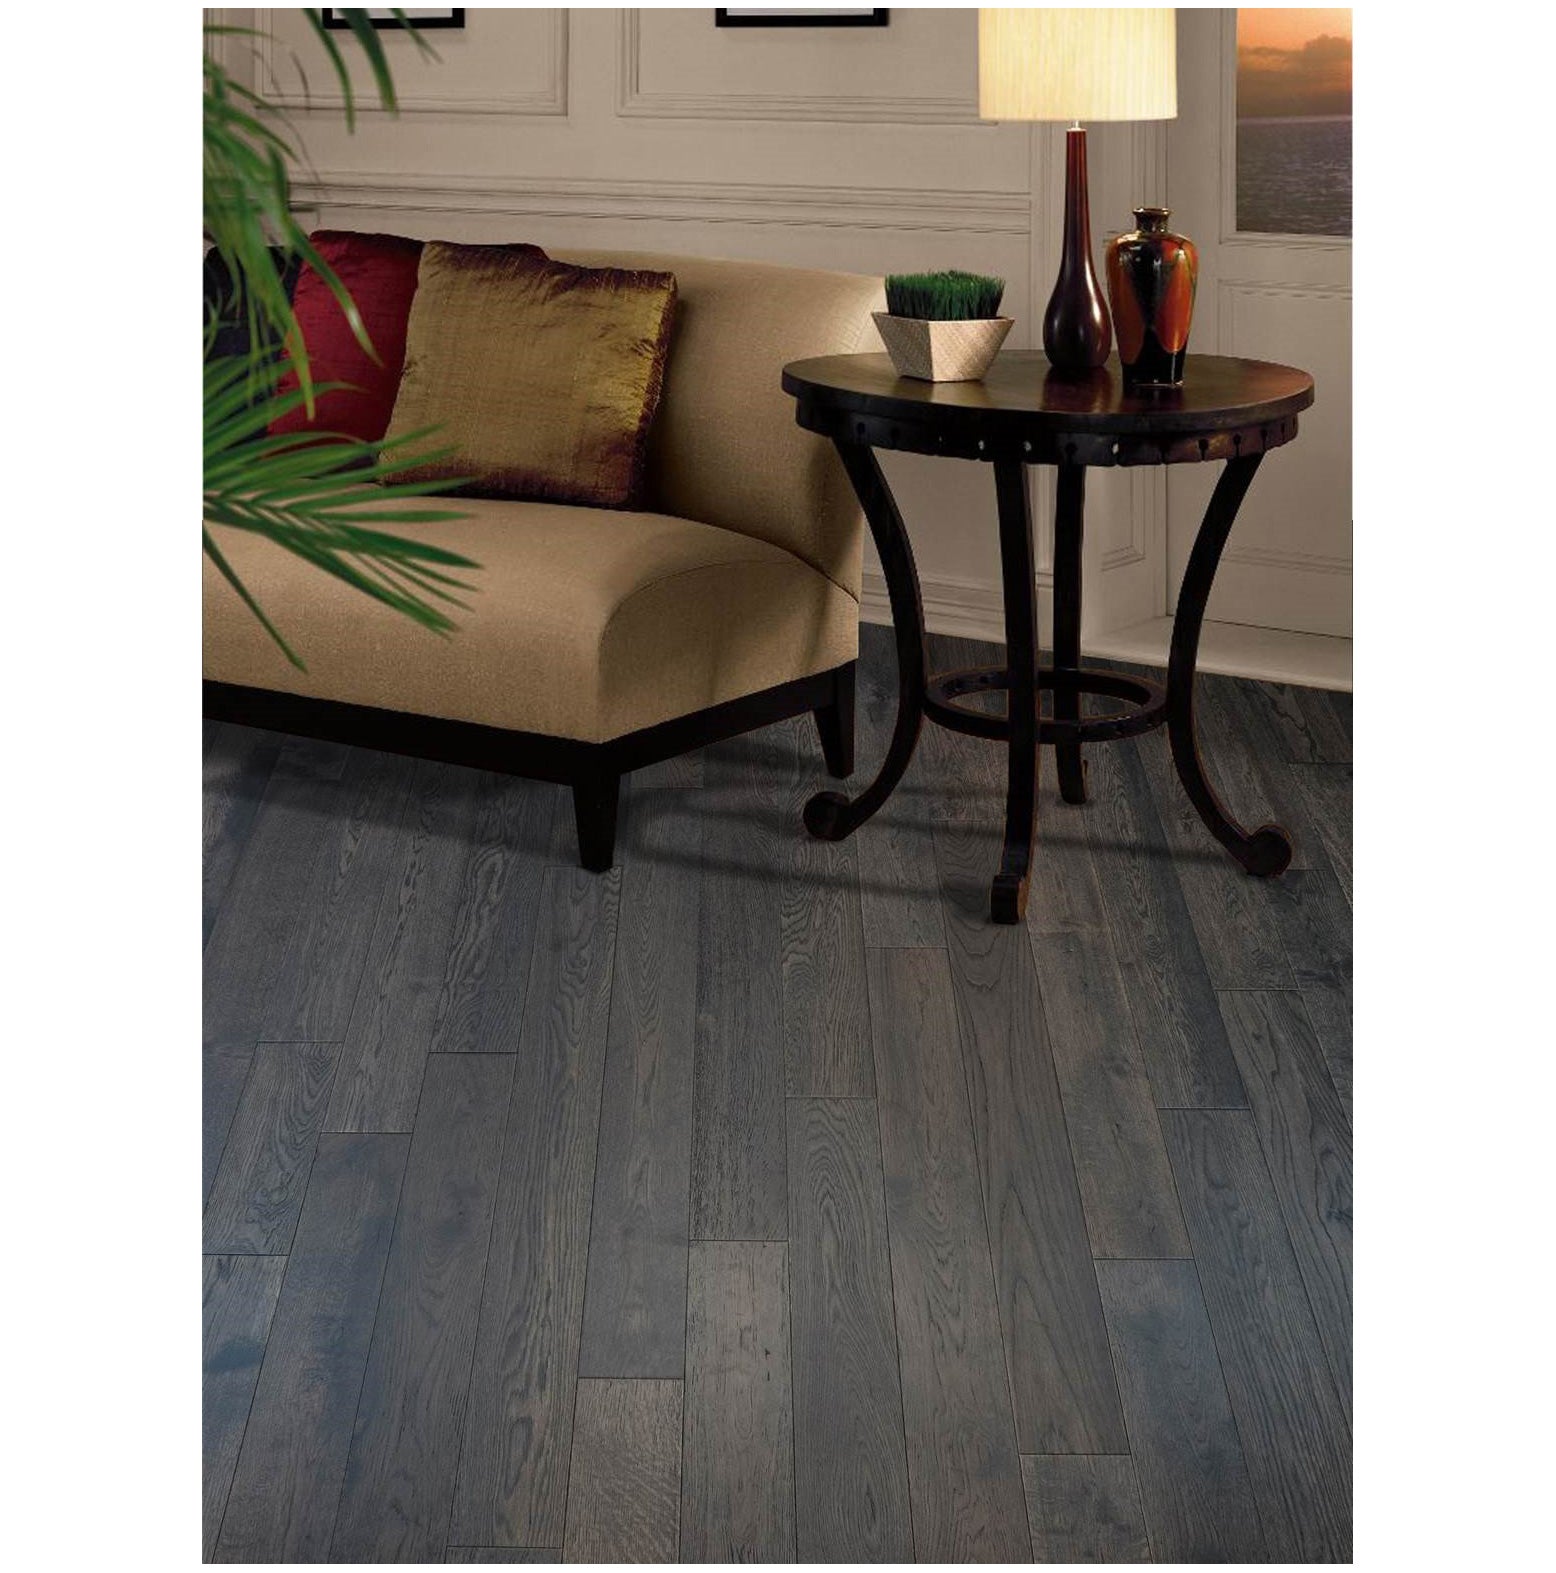 LM Flooring - Valley View - Winslow White Oak